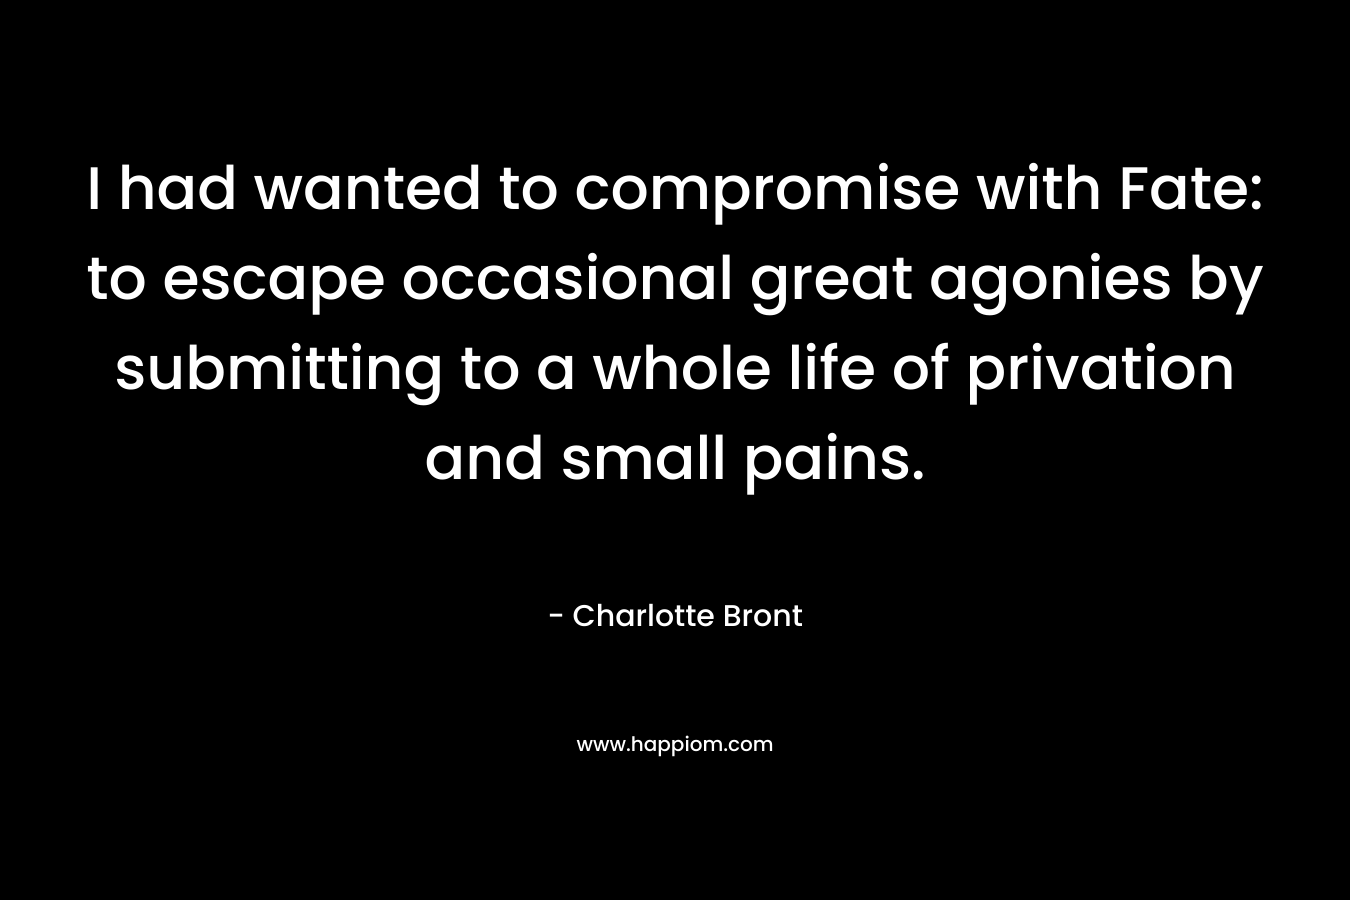 I had wanted to compromise with Fate: to escape occasional great agonies by submitting to a whole life of privation and small pains.